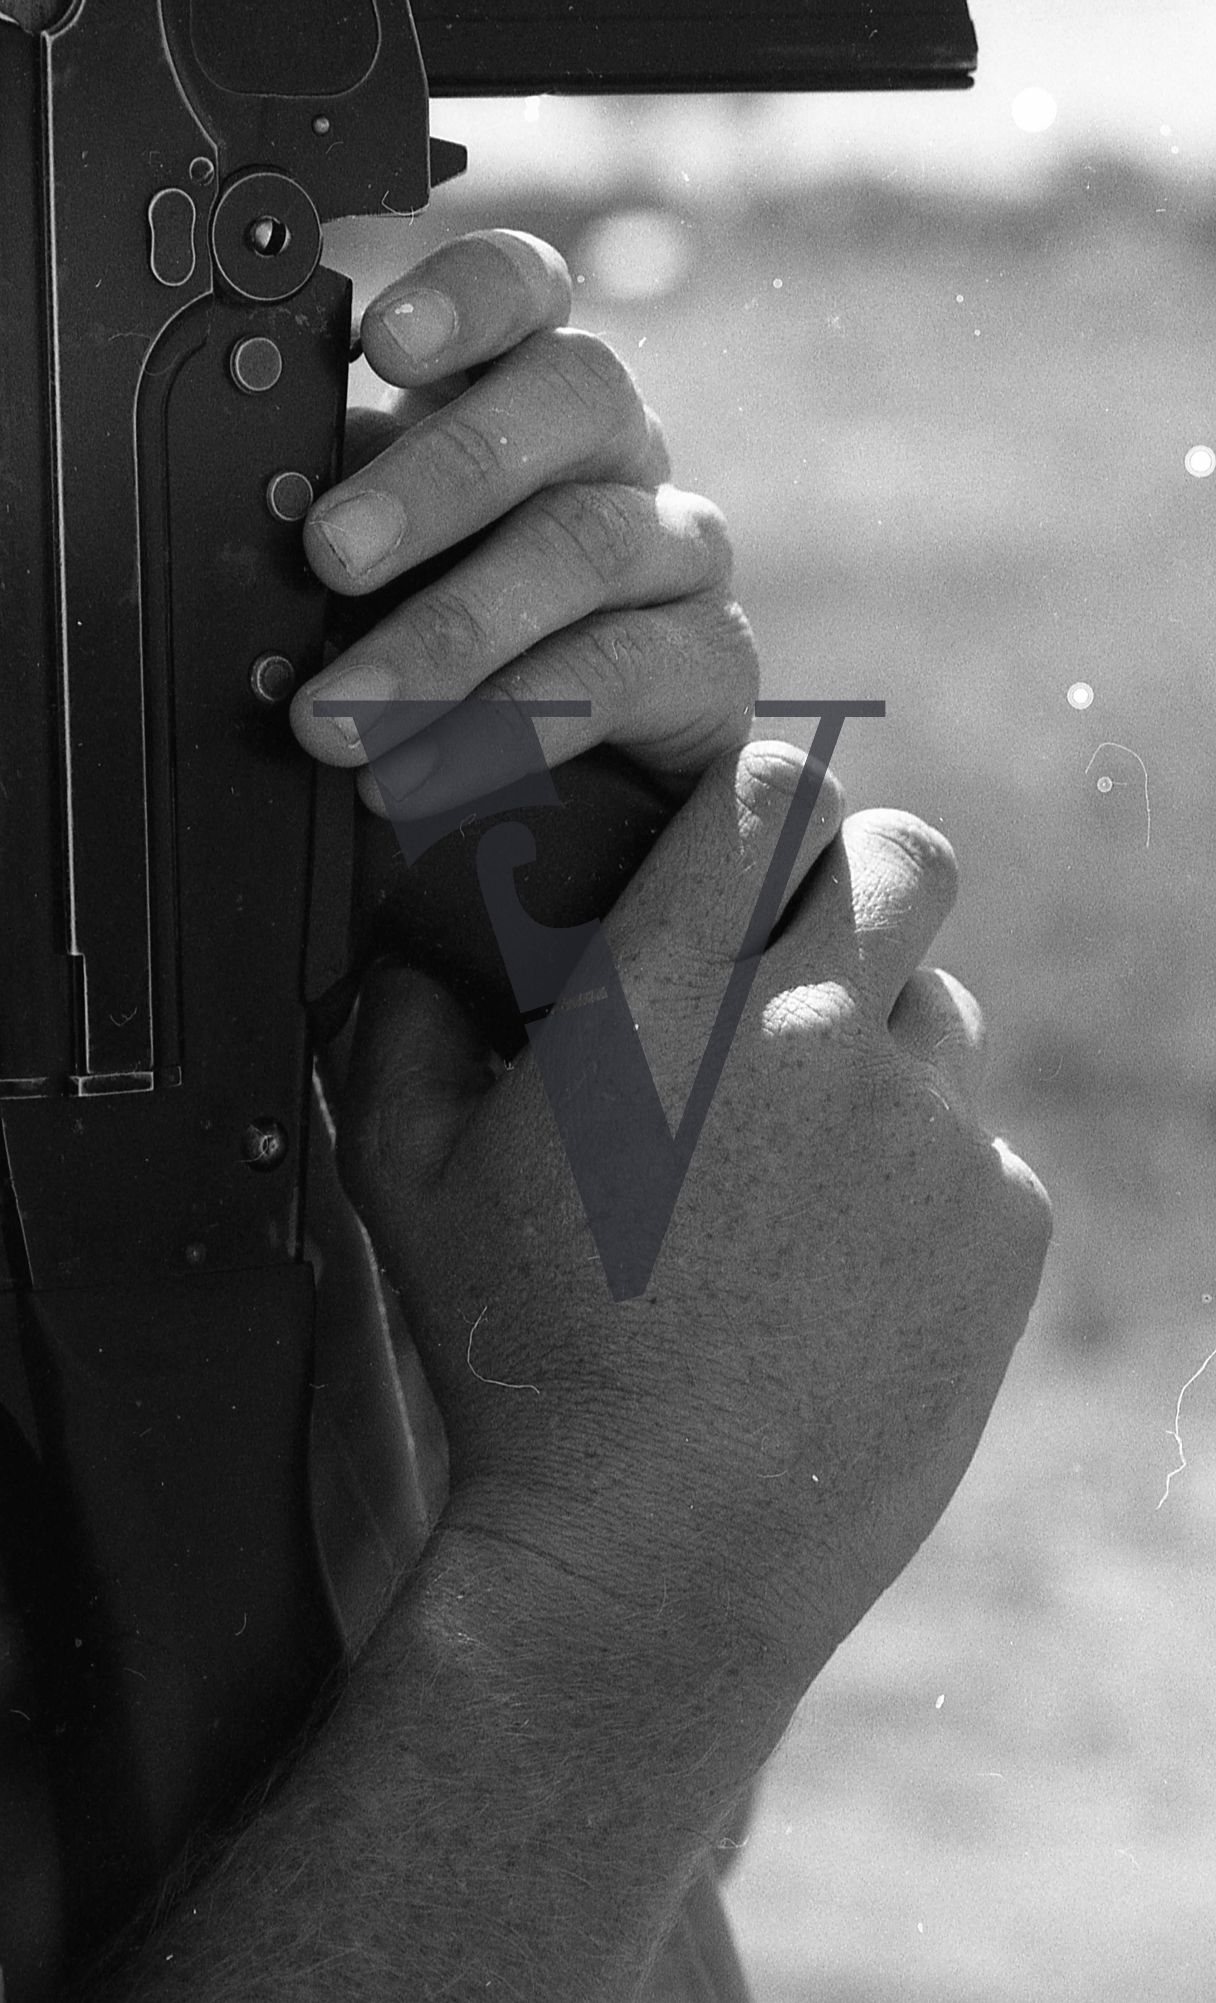 Rhodesia, “protected village”, guard’s hands with rifle, portrait.